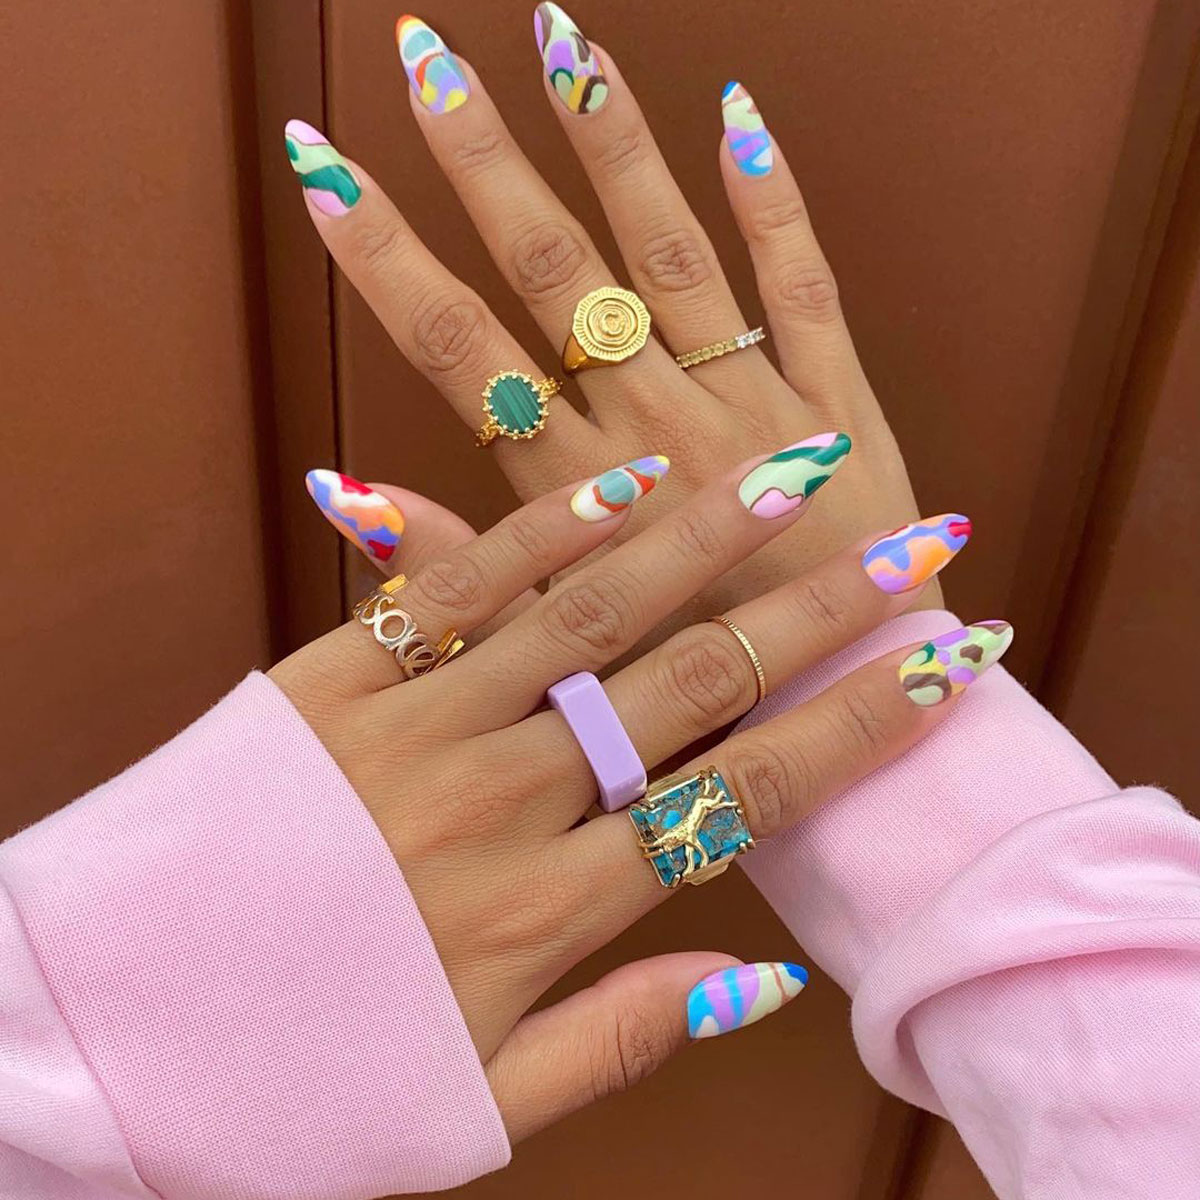 7 Jewelry Trends That Are Surging in L.A. Right Now